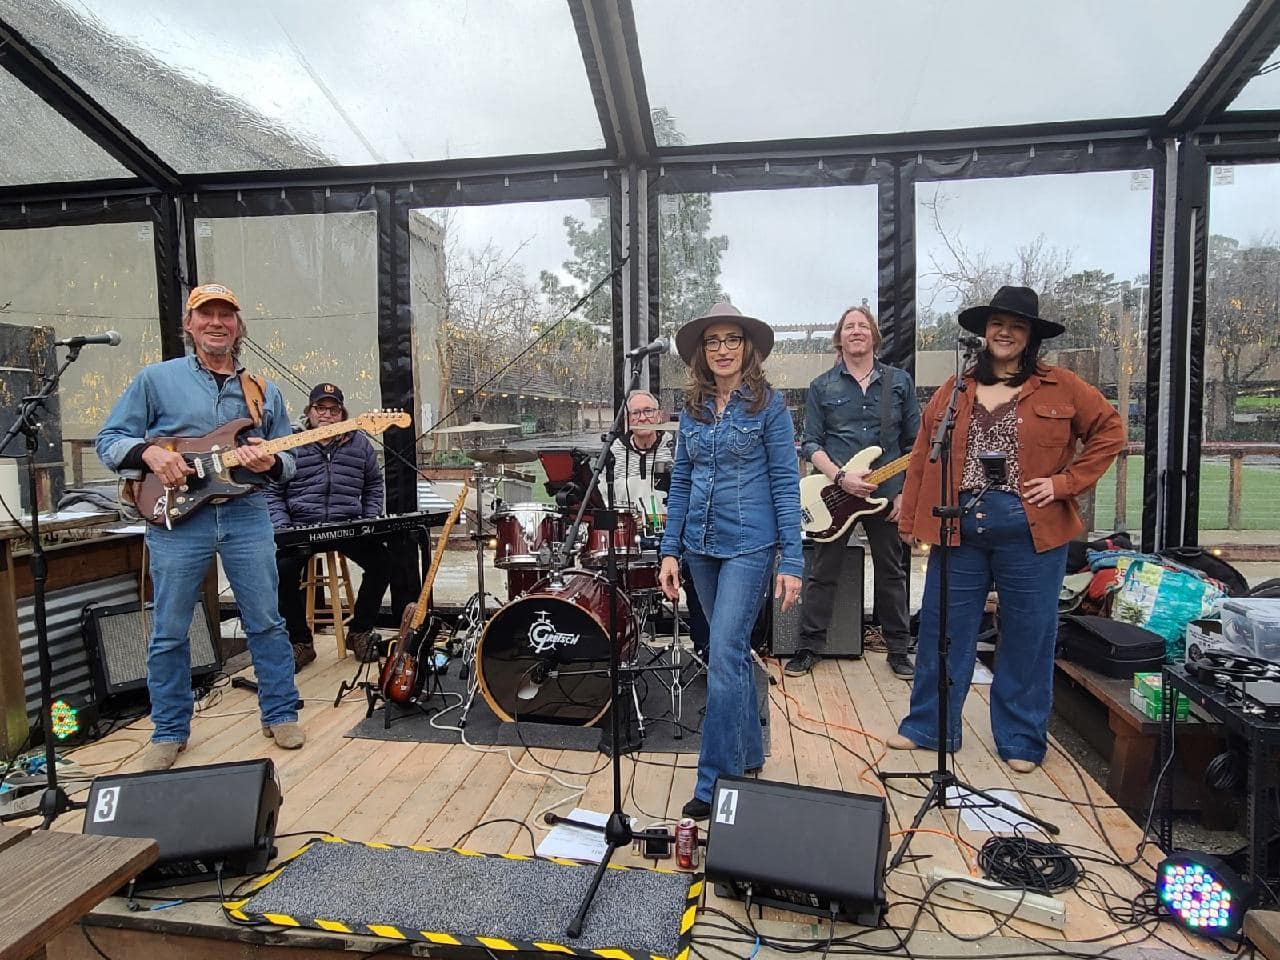 Countyline Blues & Americana band during performance outdoors